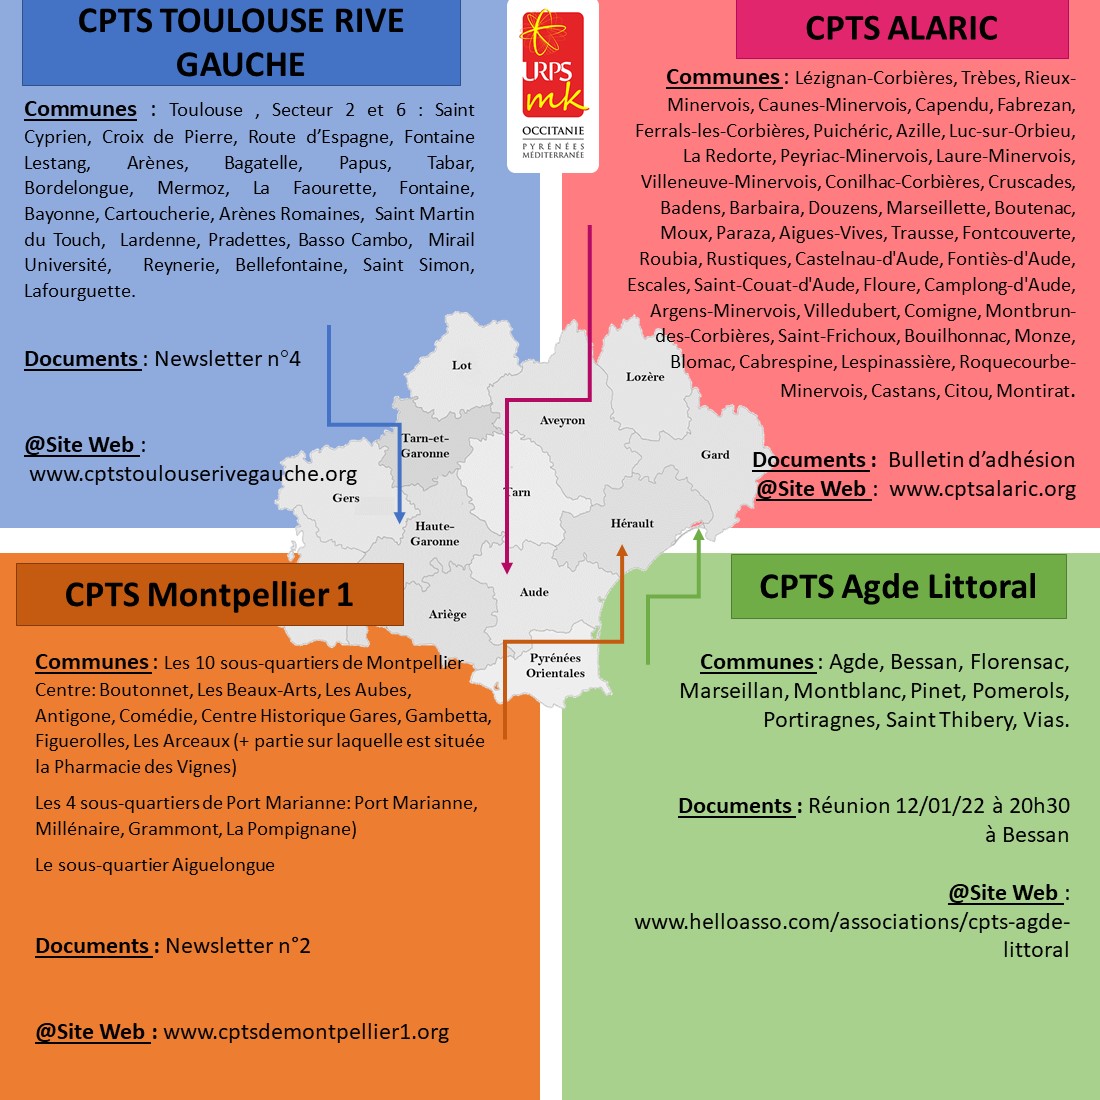 Cpts infographie fev 22 alaric mtp 1 agde toulouse rv gche